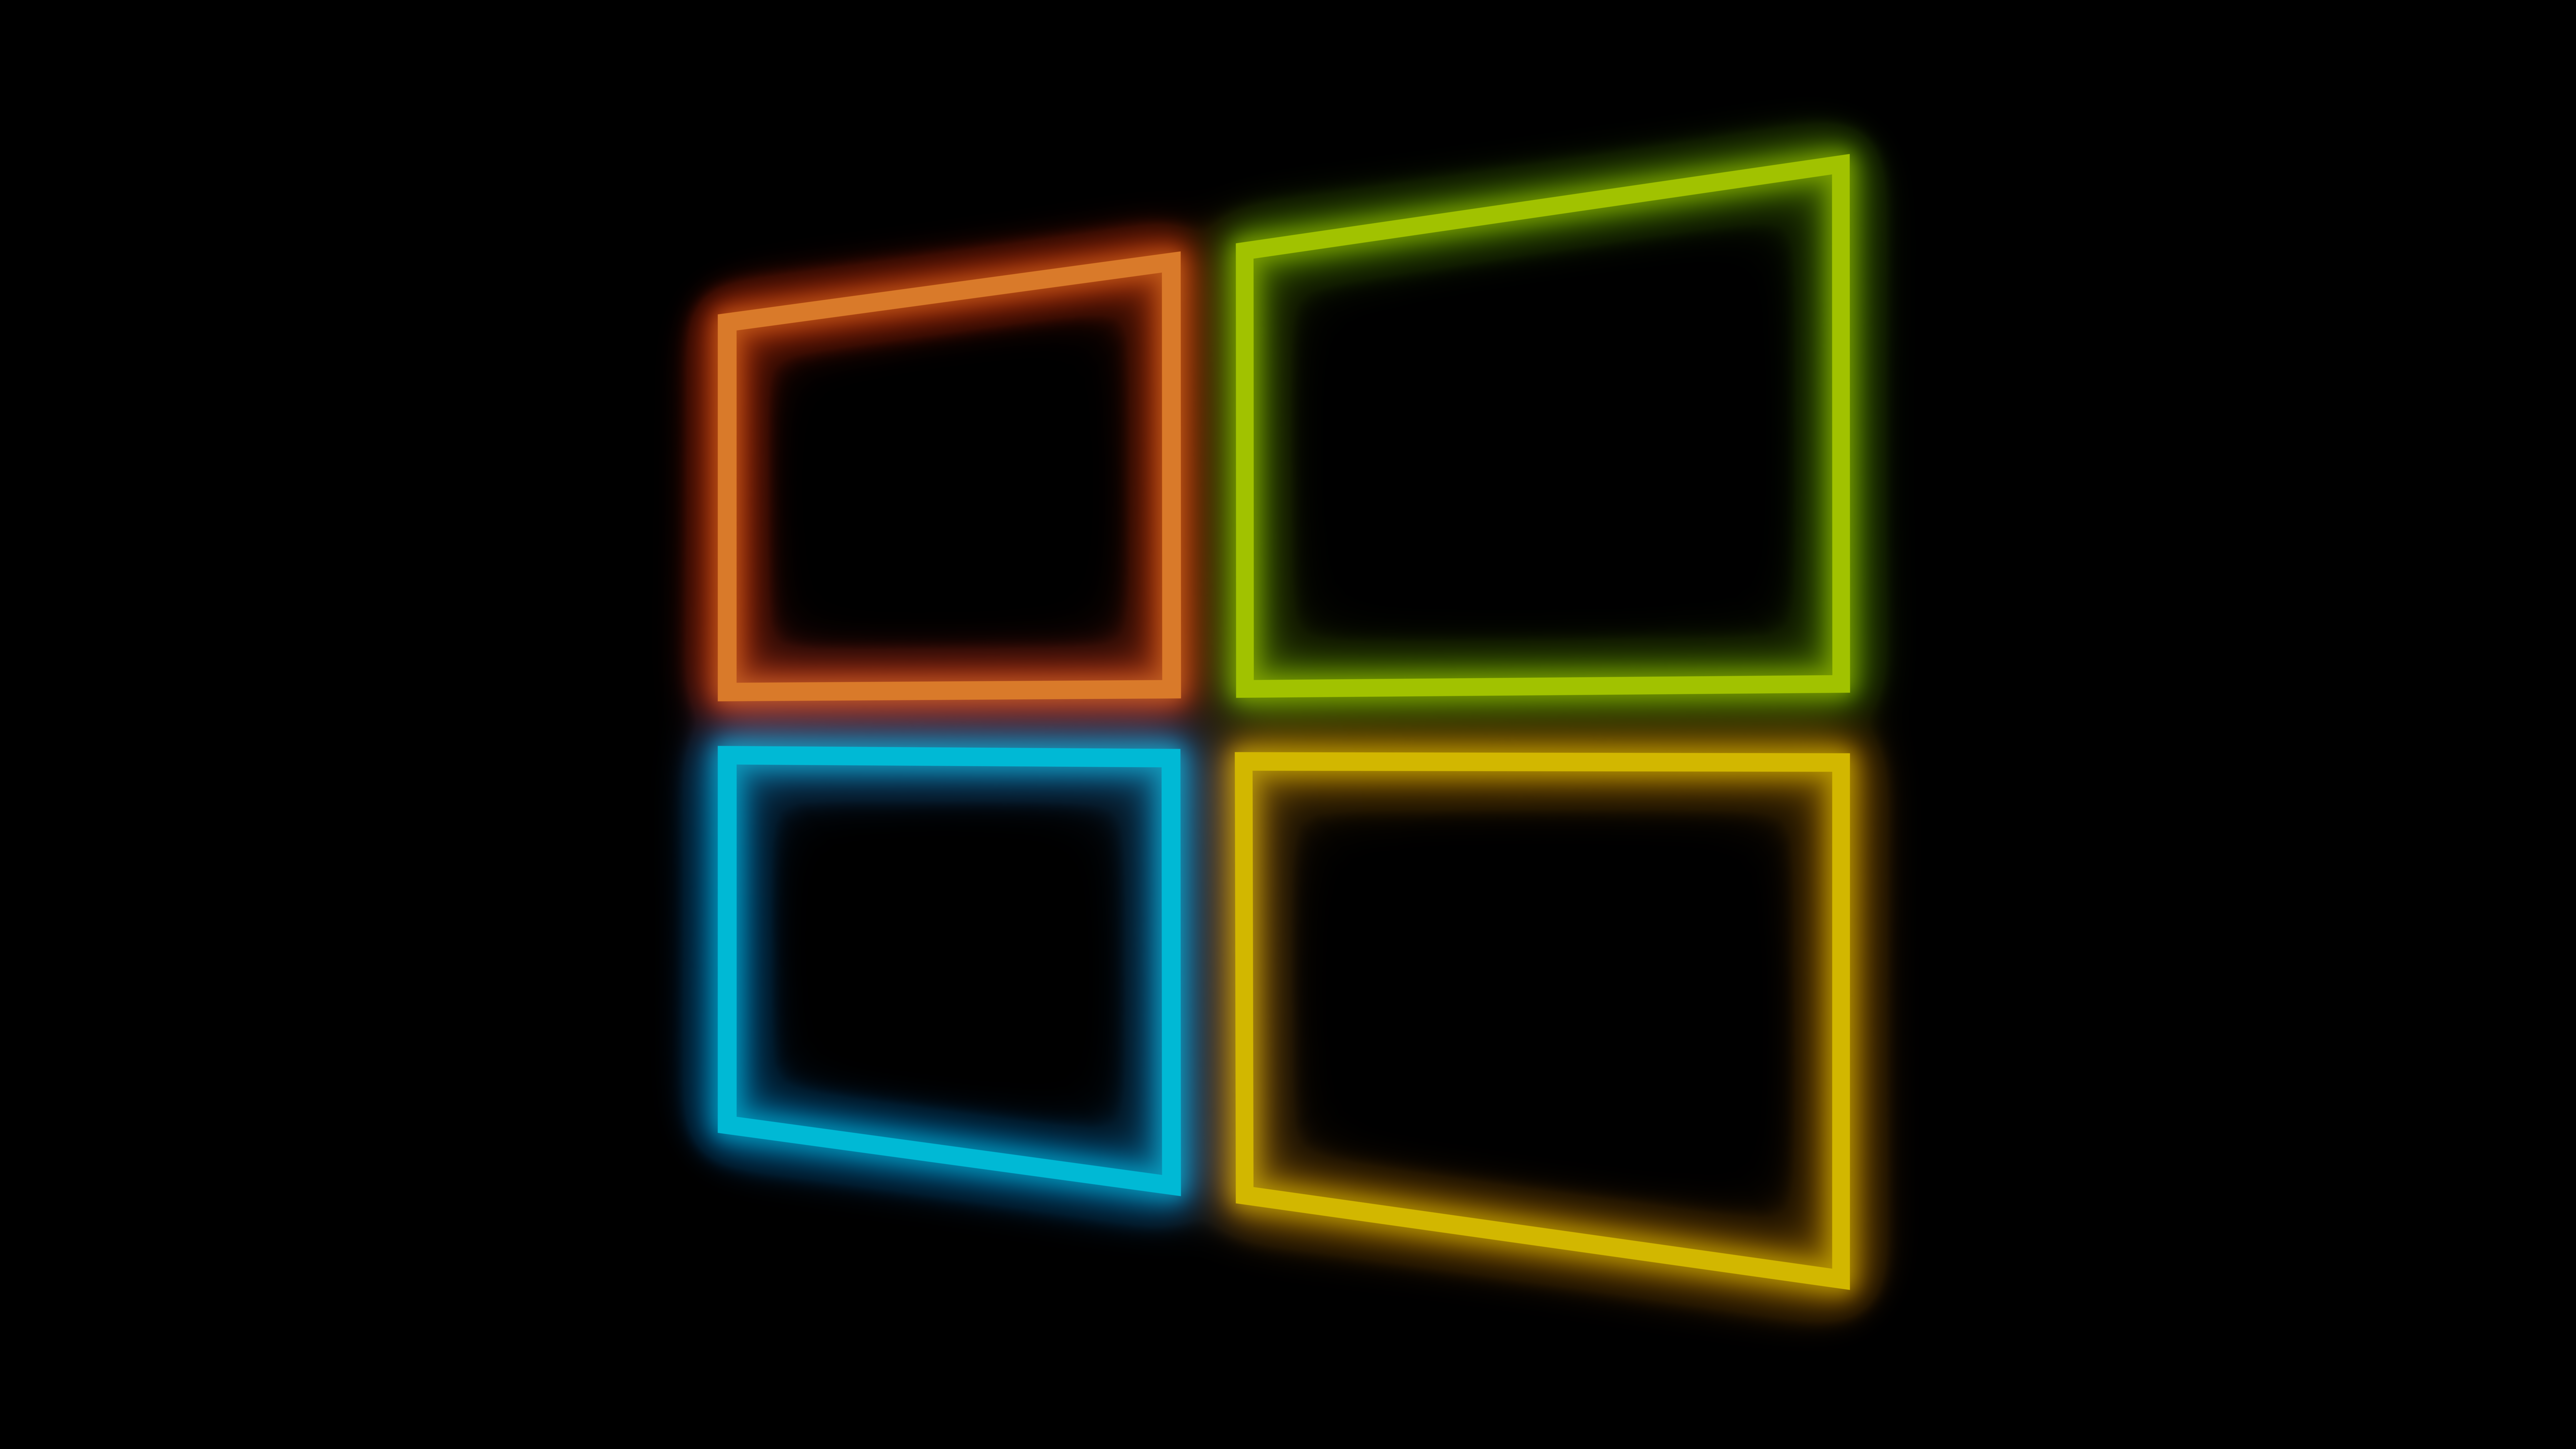 Windows 4K wallpapers for your desktop or mobile screen free and easy